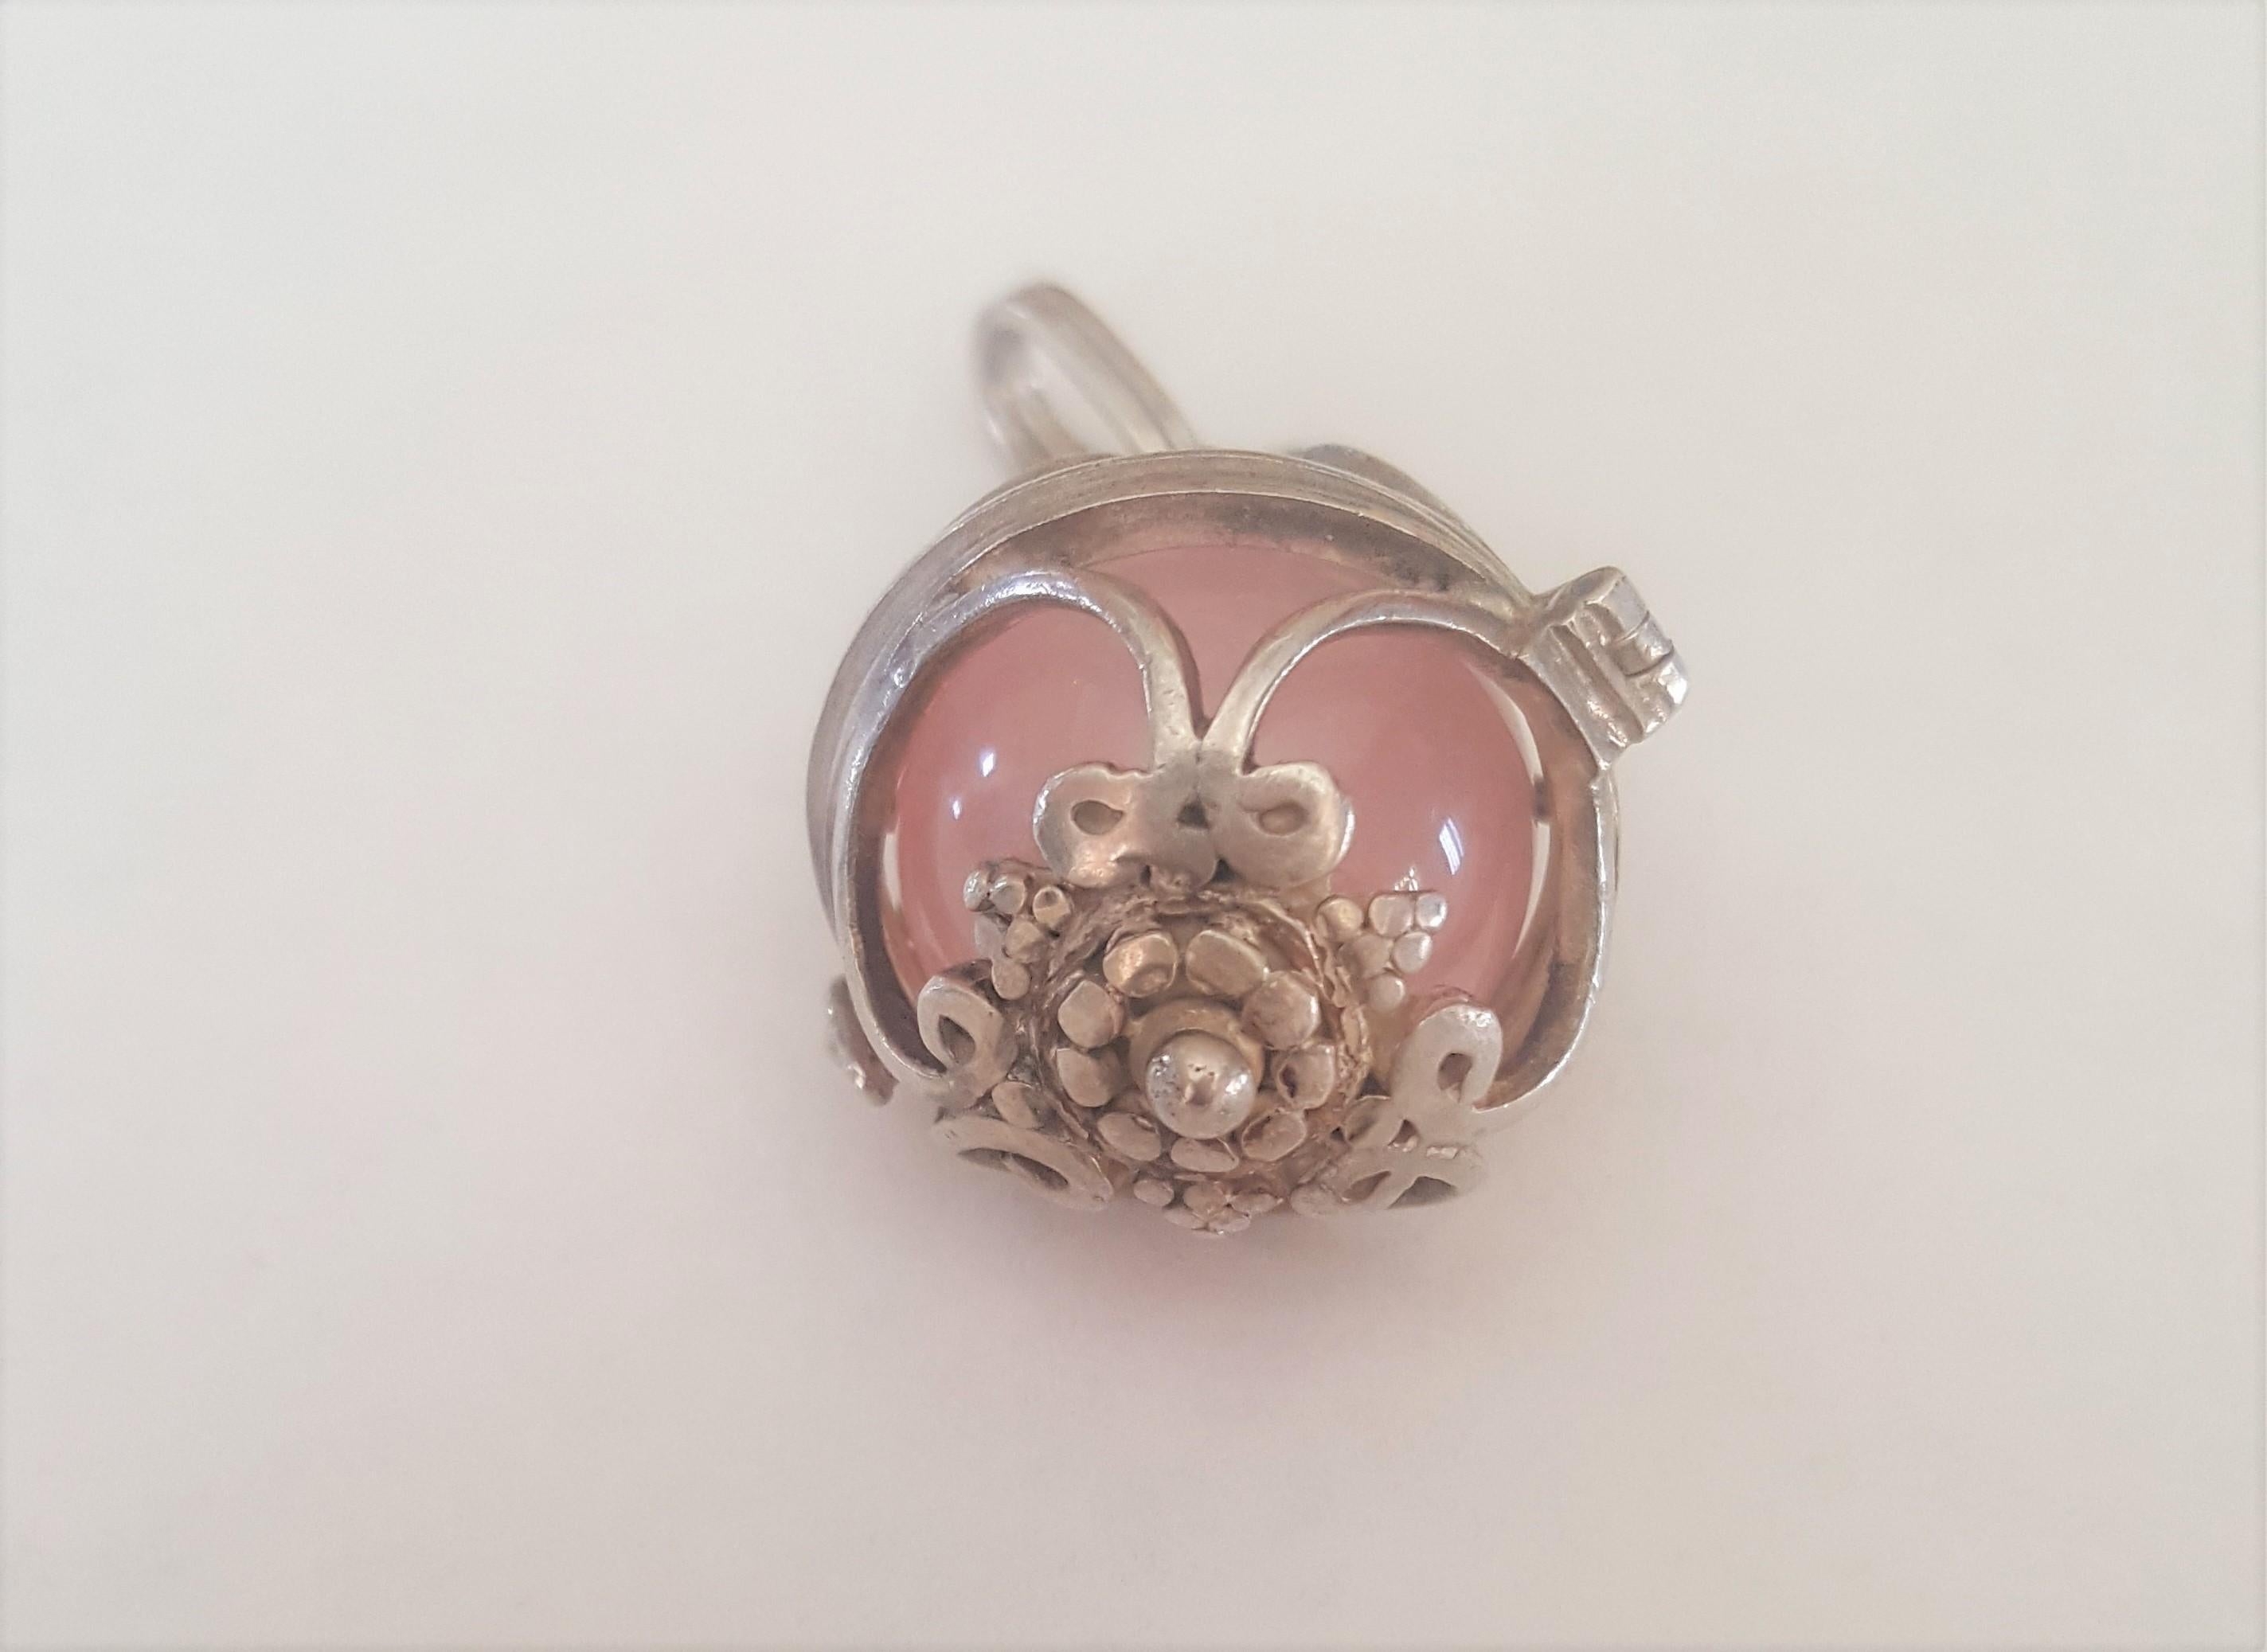 Silver Harmony Ball Pendant with Rose Quartz Ball and Garnet Accent 2